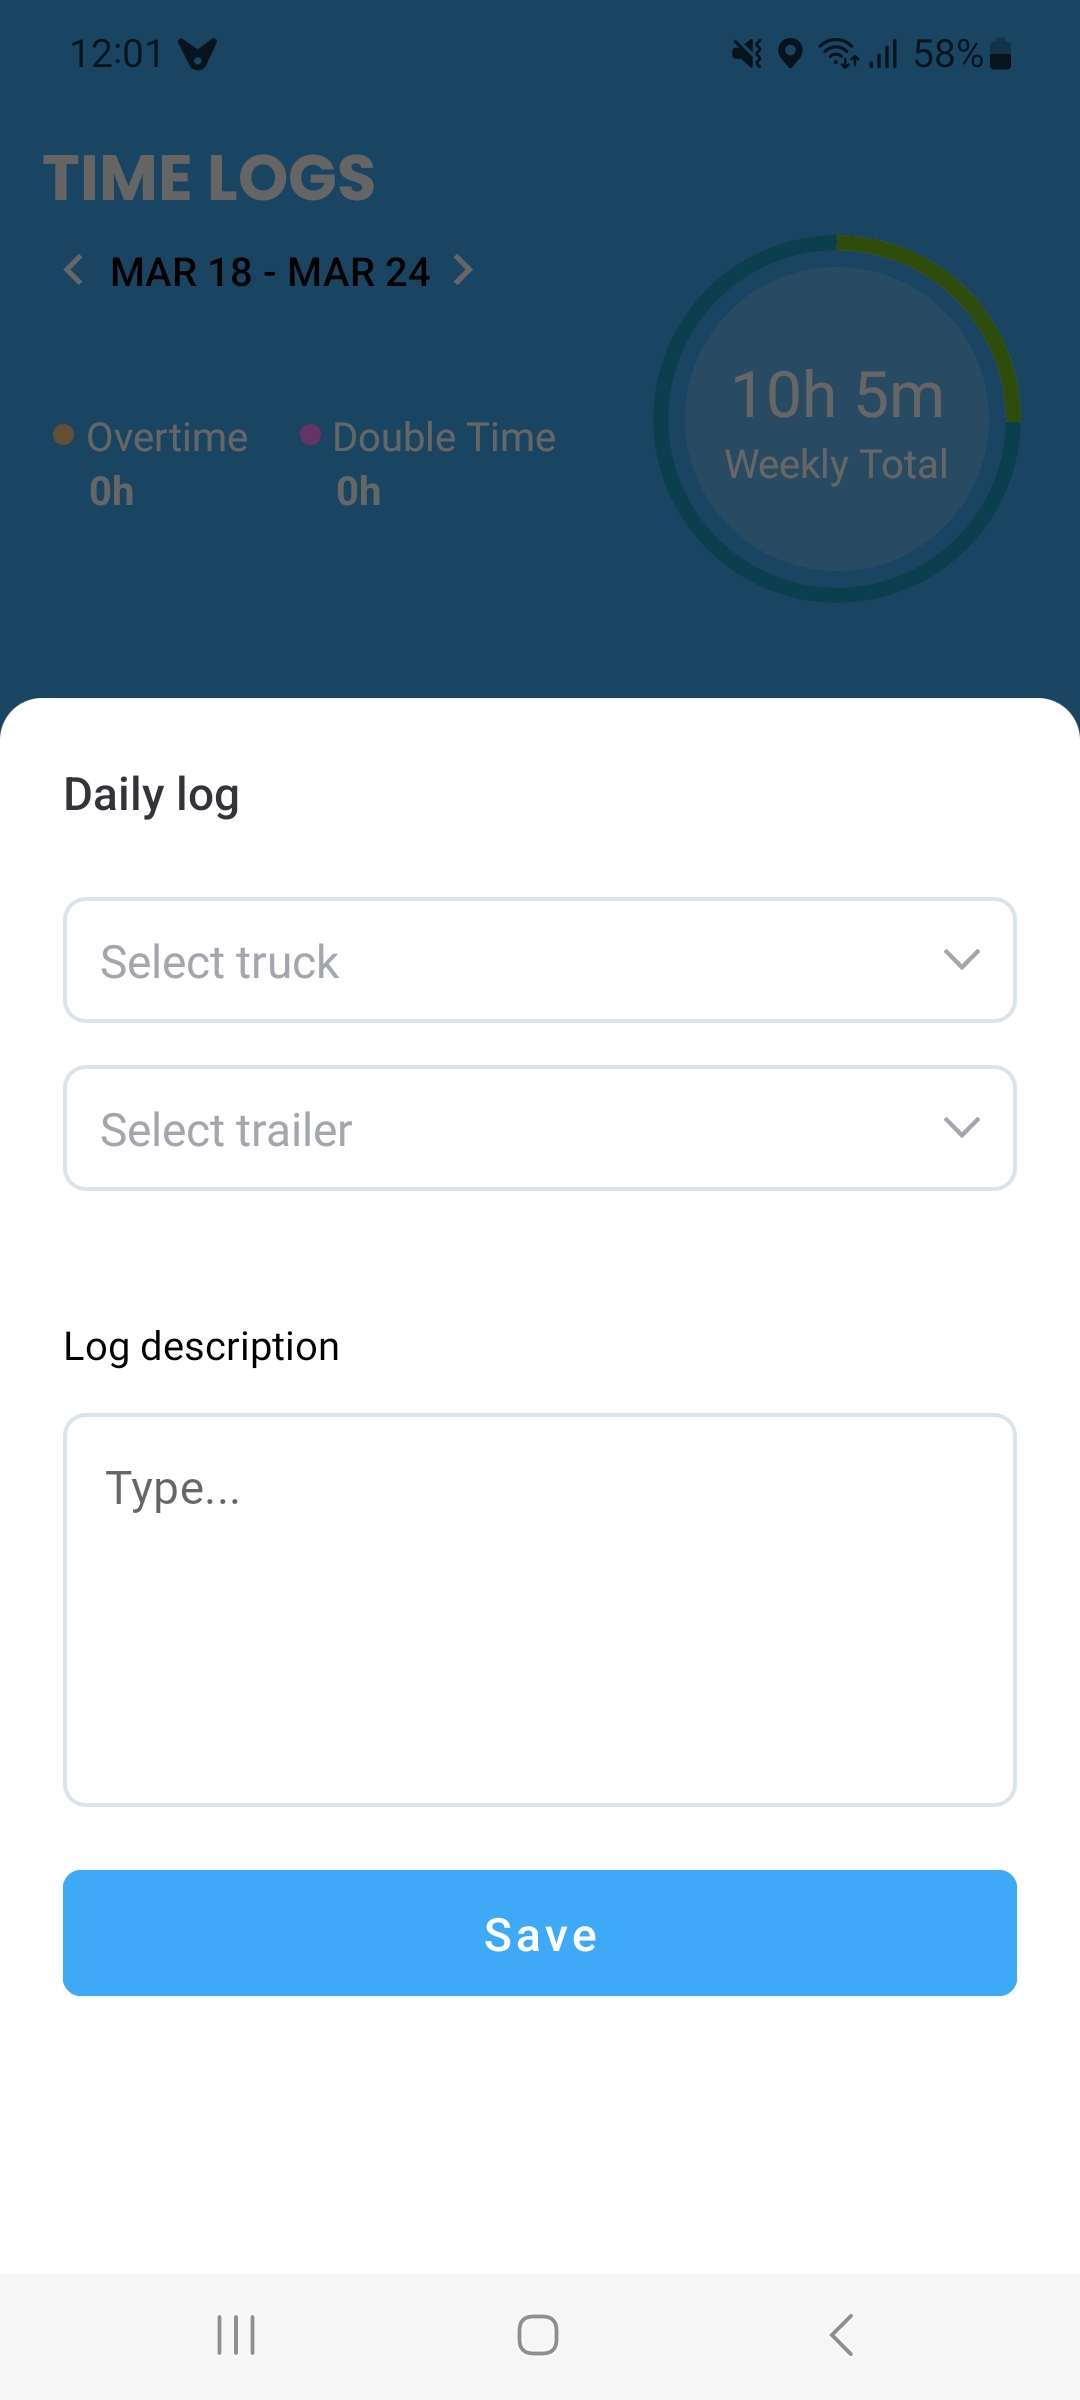 Adding daily logs in the Personal App